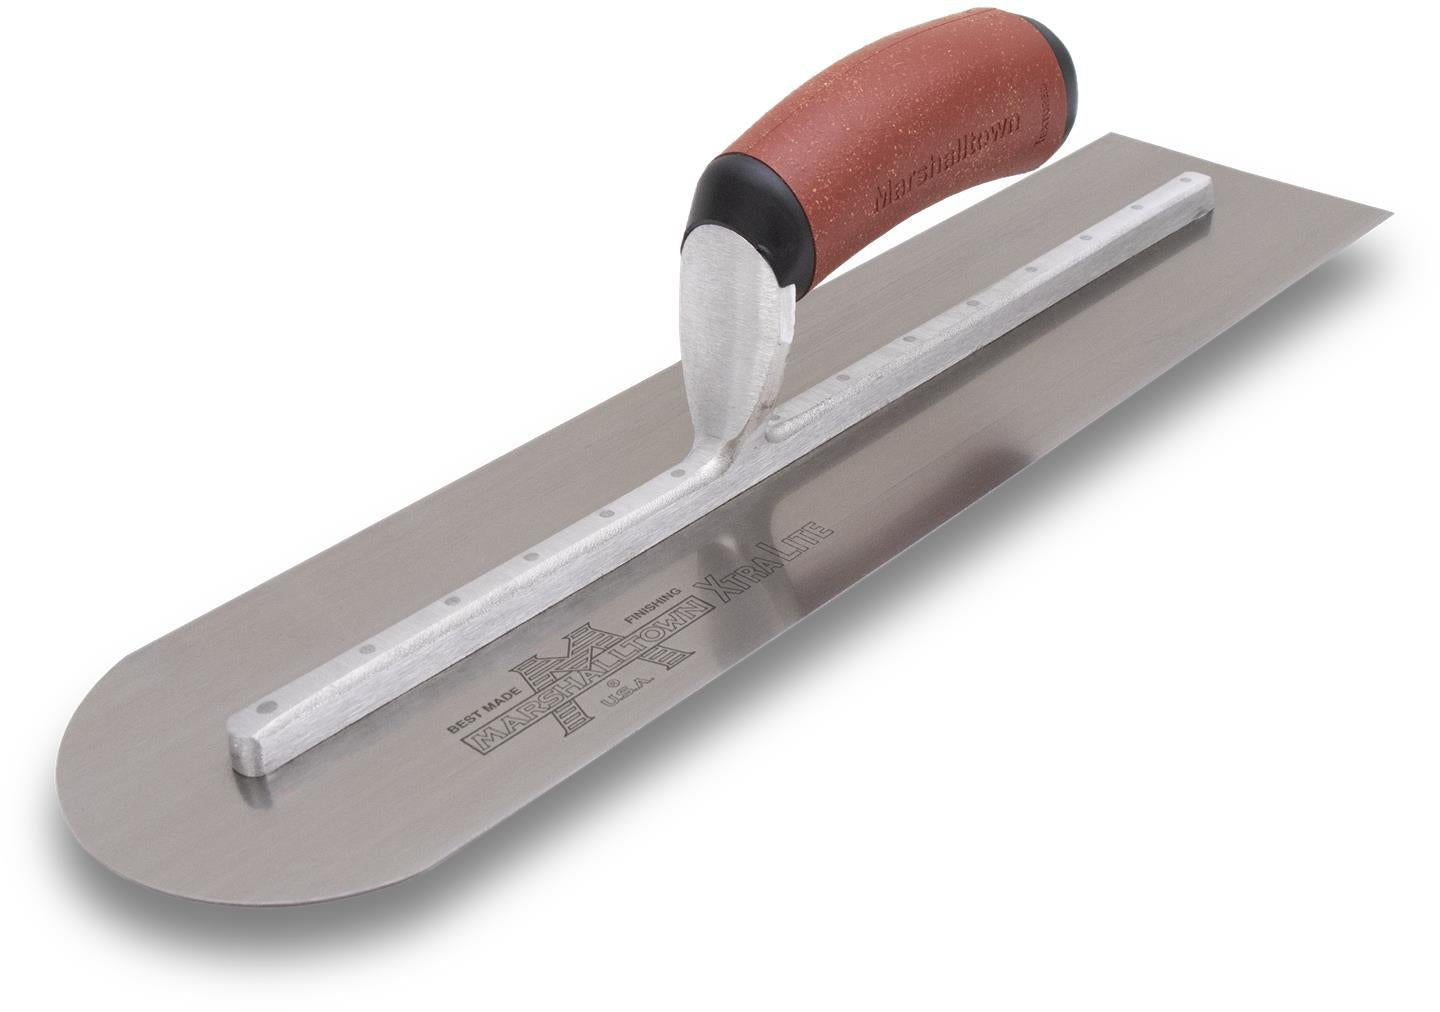 Marshalltown  MXS81REDC - 18 X 4 Rounded Front Finishing Trowel - DuraCork Handle